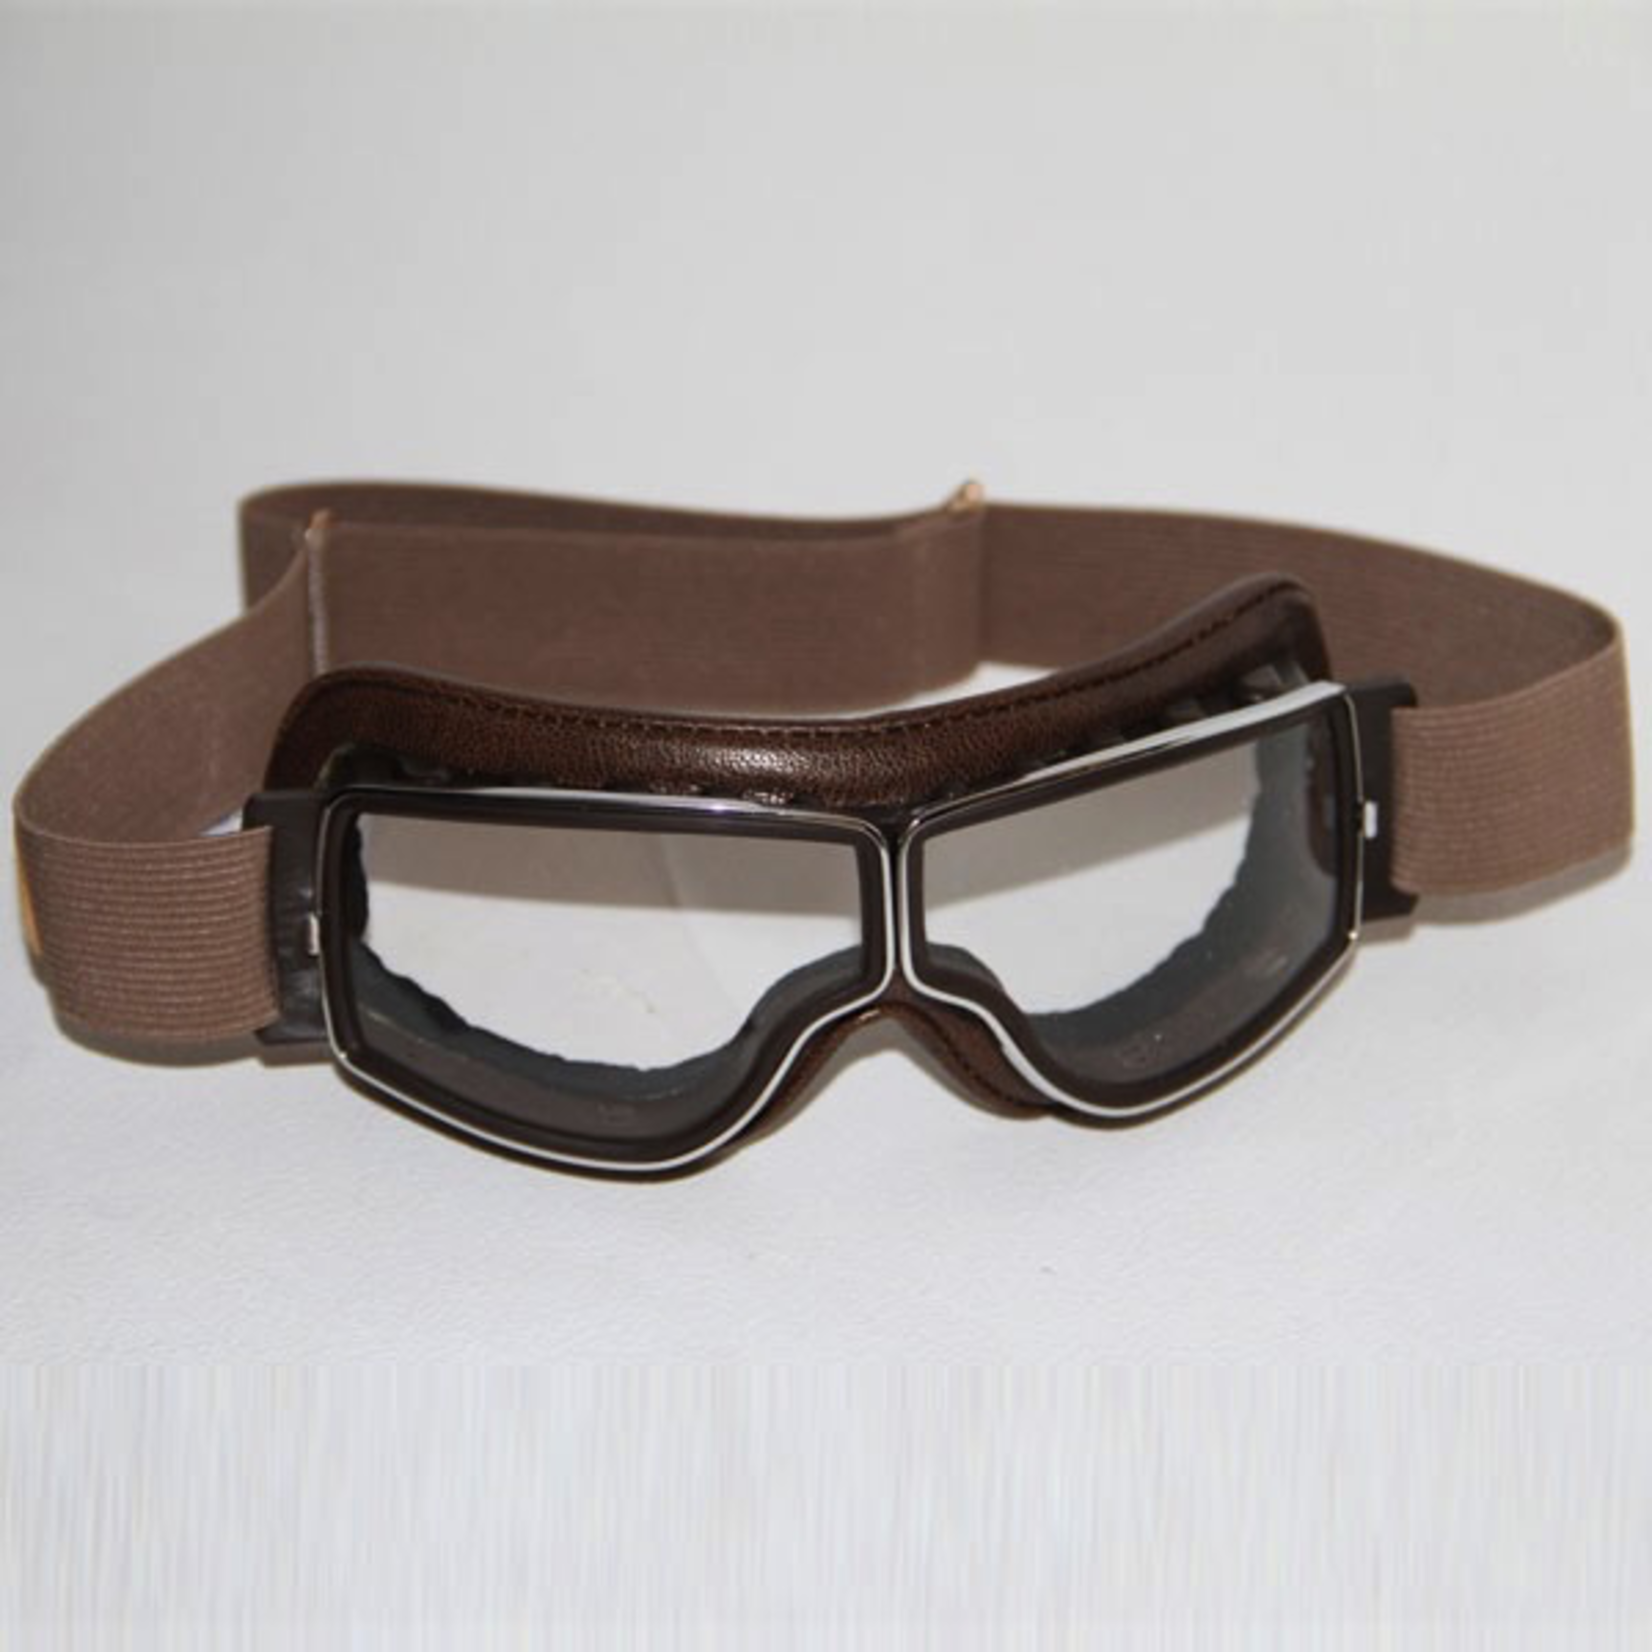 Lifestyle Goggles, Aviator T2 Brown/Chrome